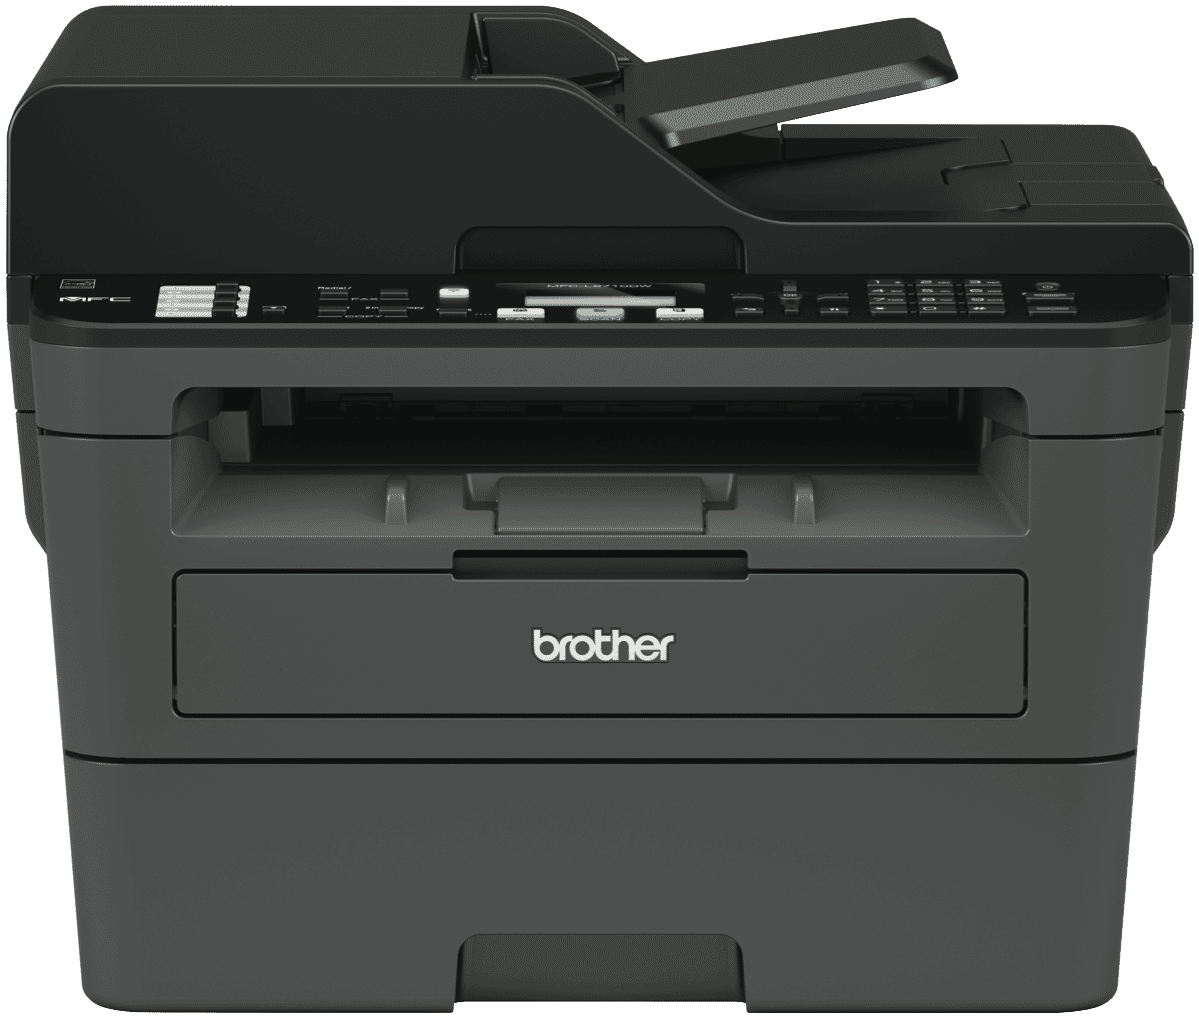 Brother Mfc L2710dw Brother Wireless Mono Laser Mfc Printer Mfc L2710dw At The Good Guys